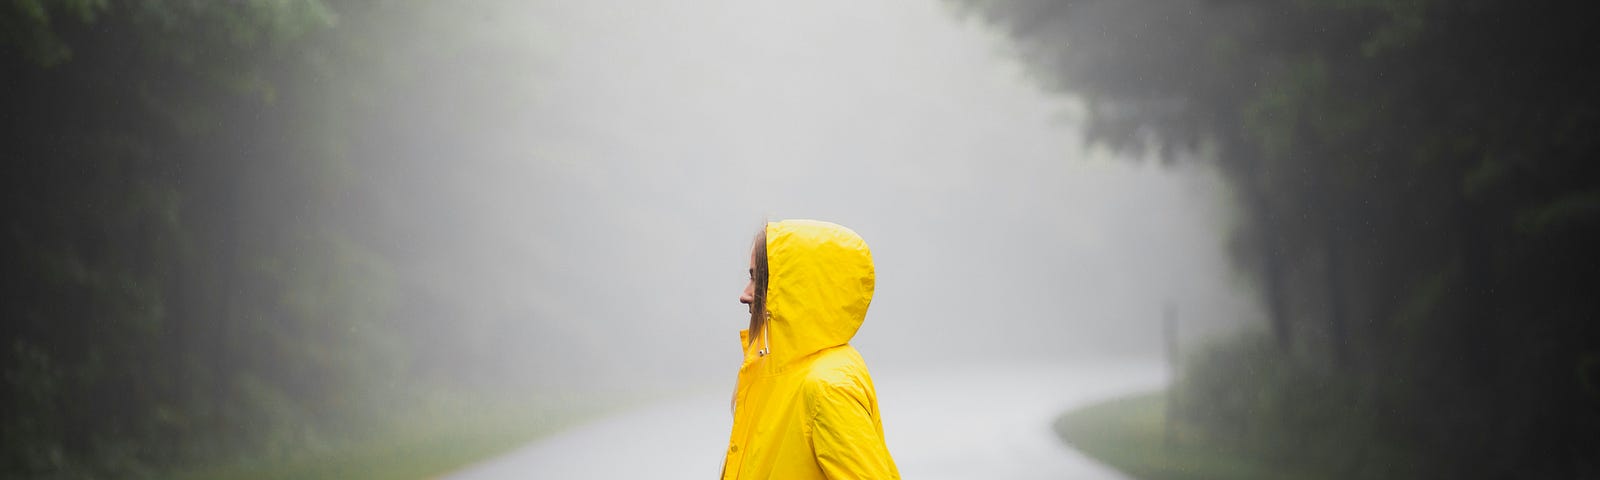 A woman standing in a yellow raincoat on a deserted wooded street.